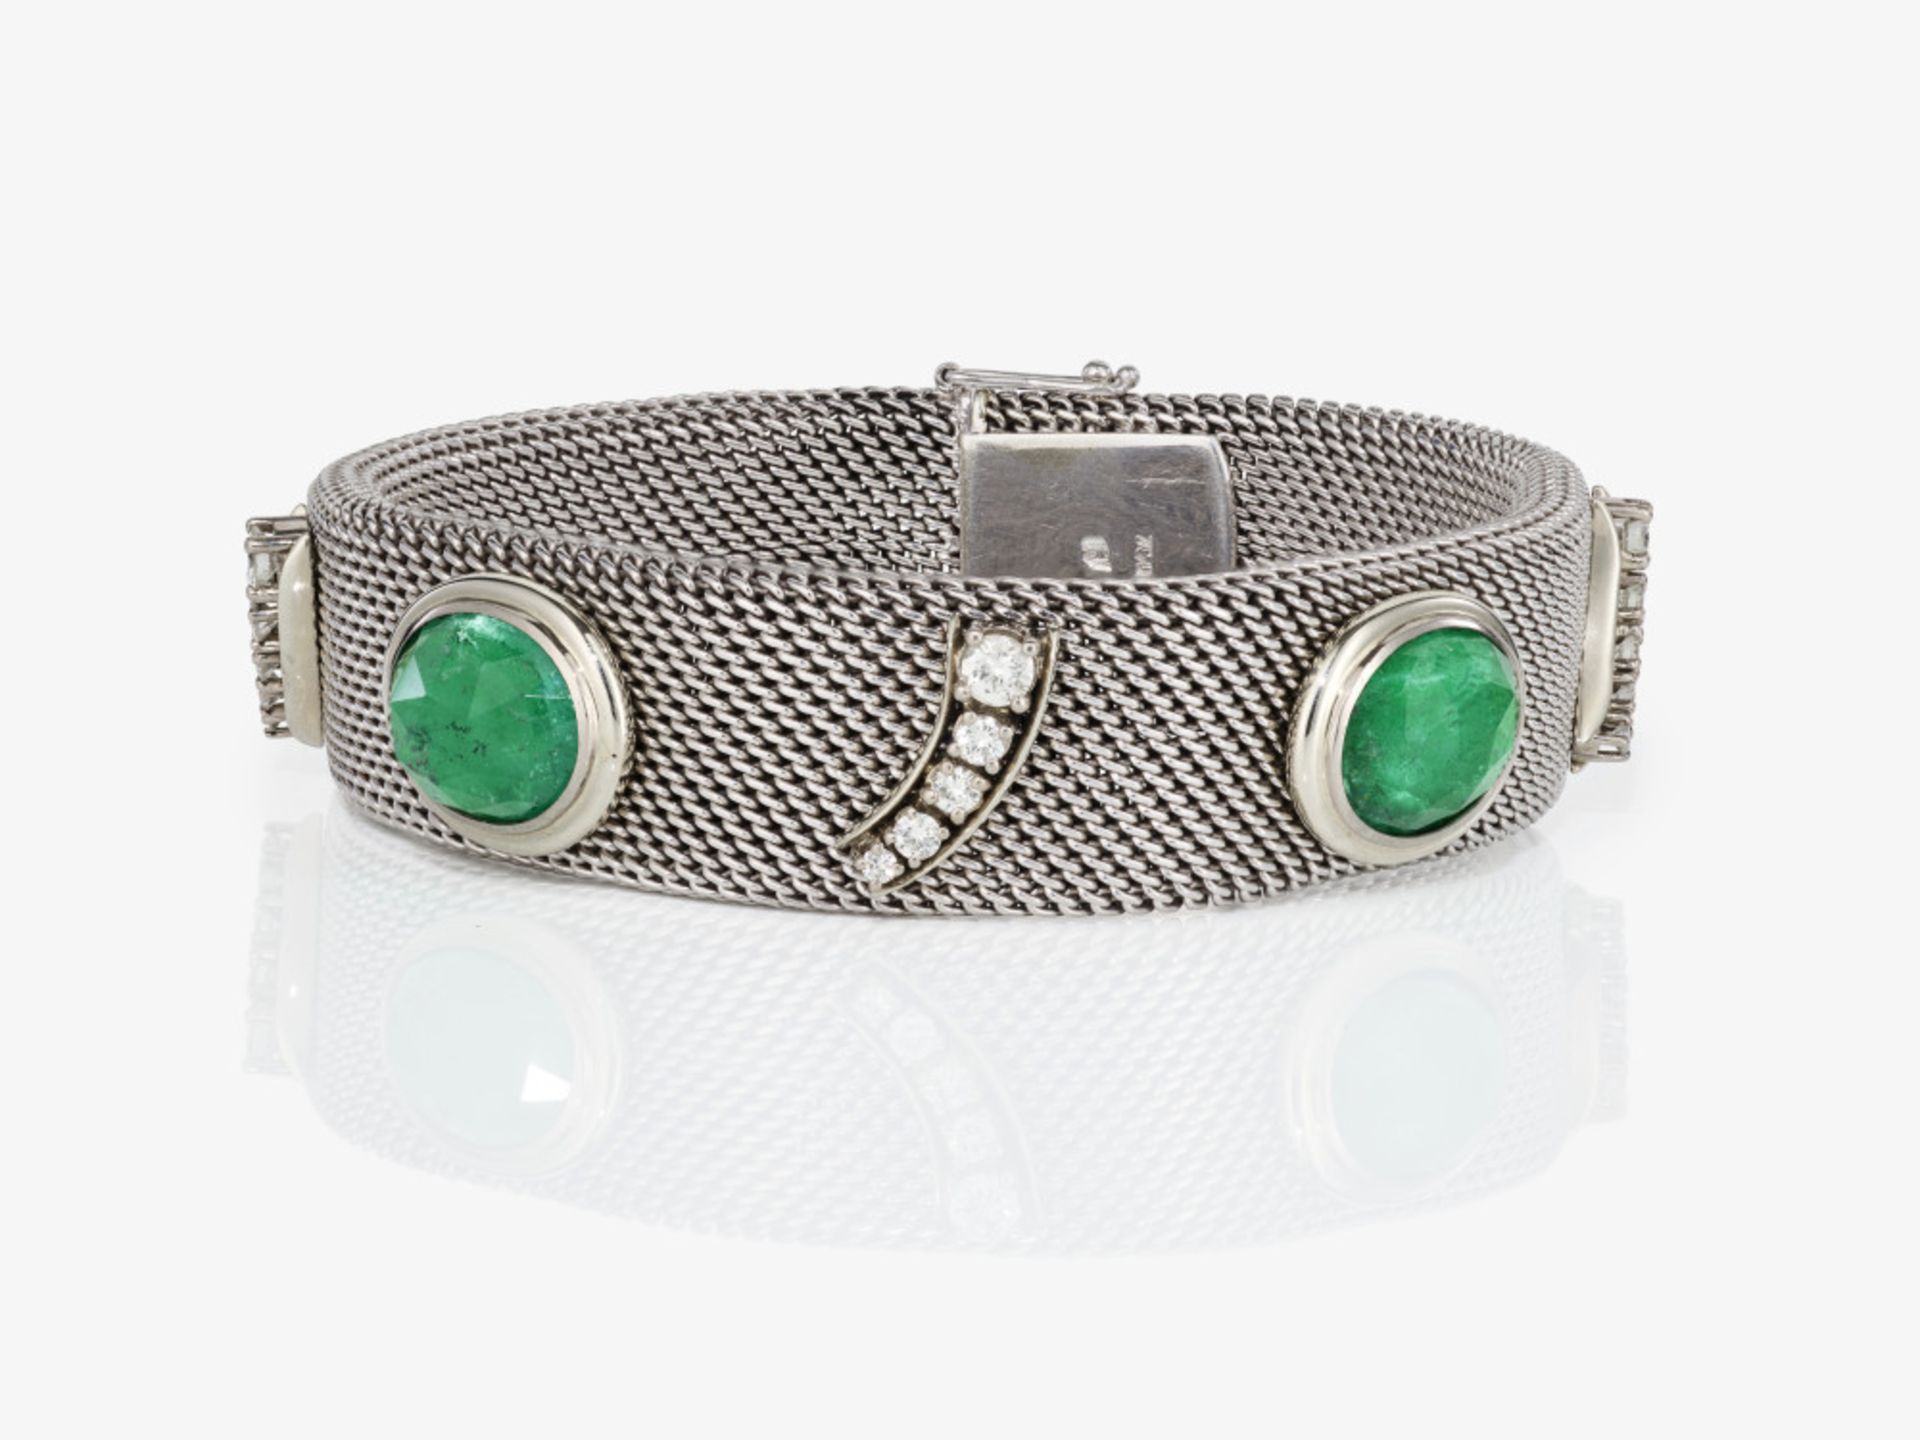 A bracelet with two emeralds and brilliant-cut diamonds - Germany, 1970s